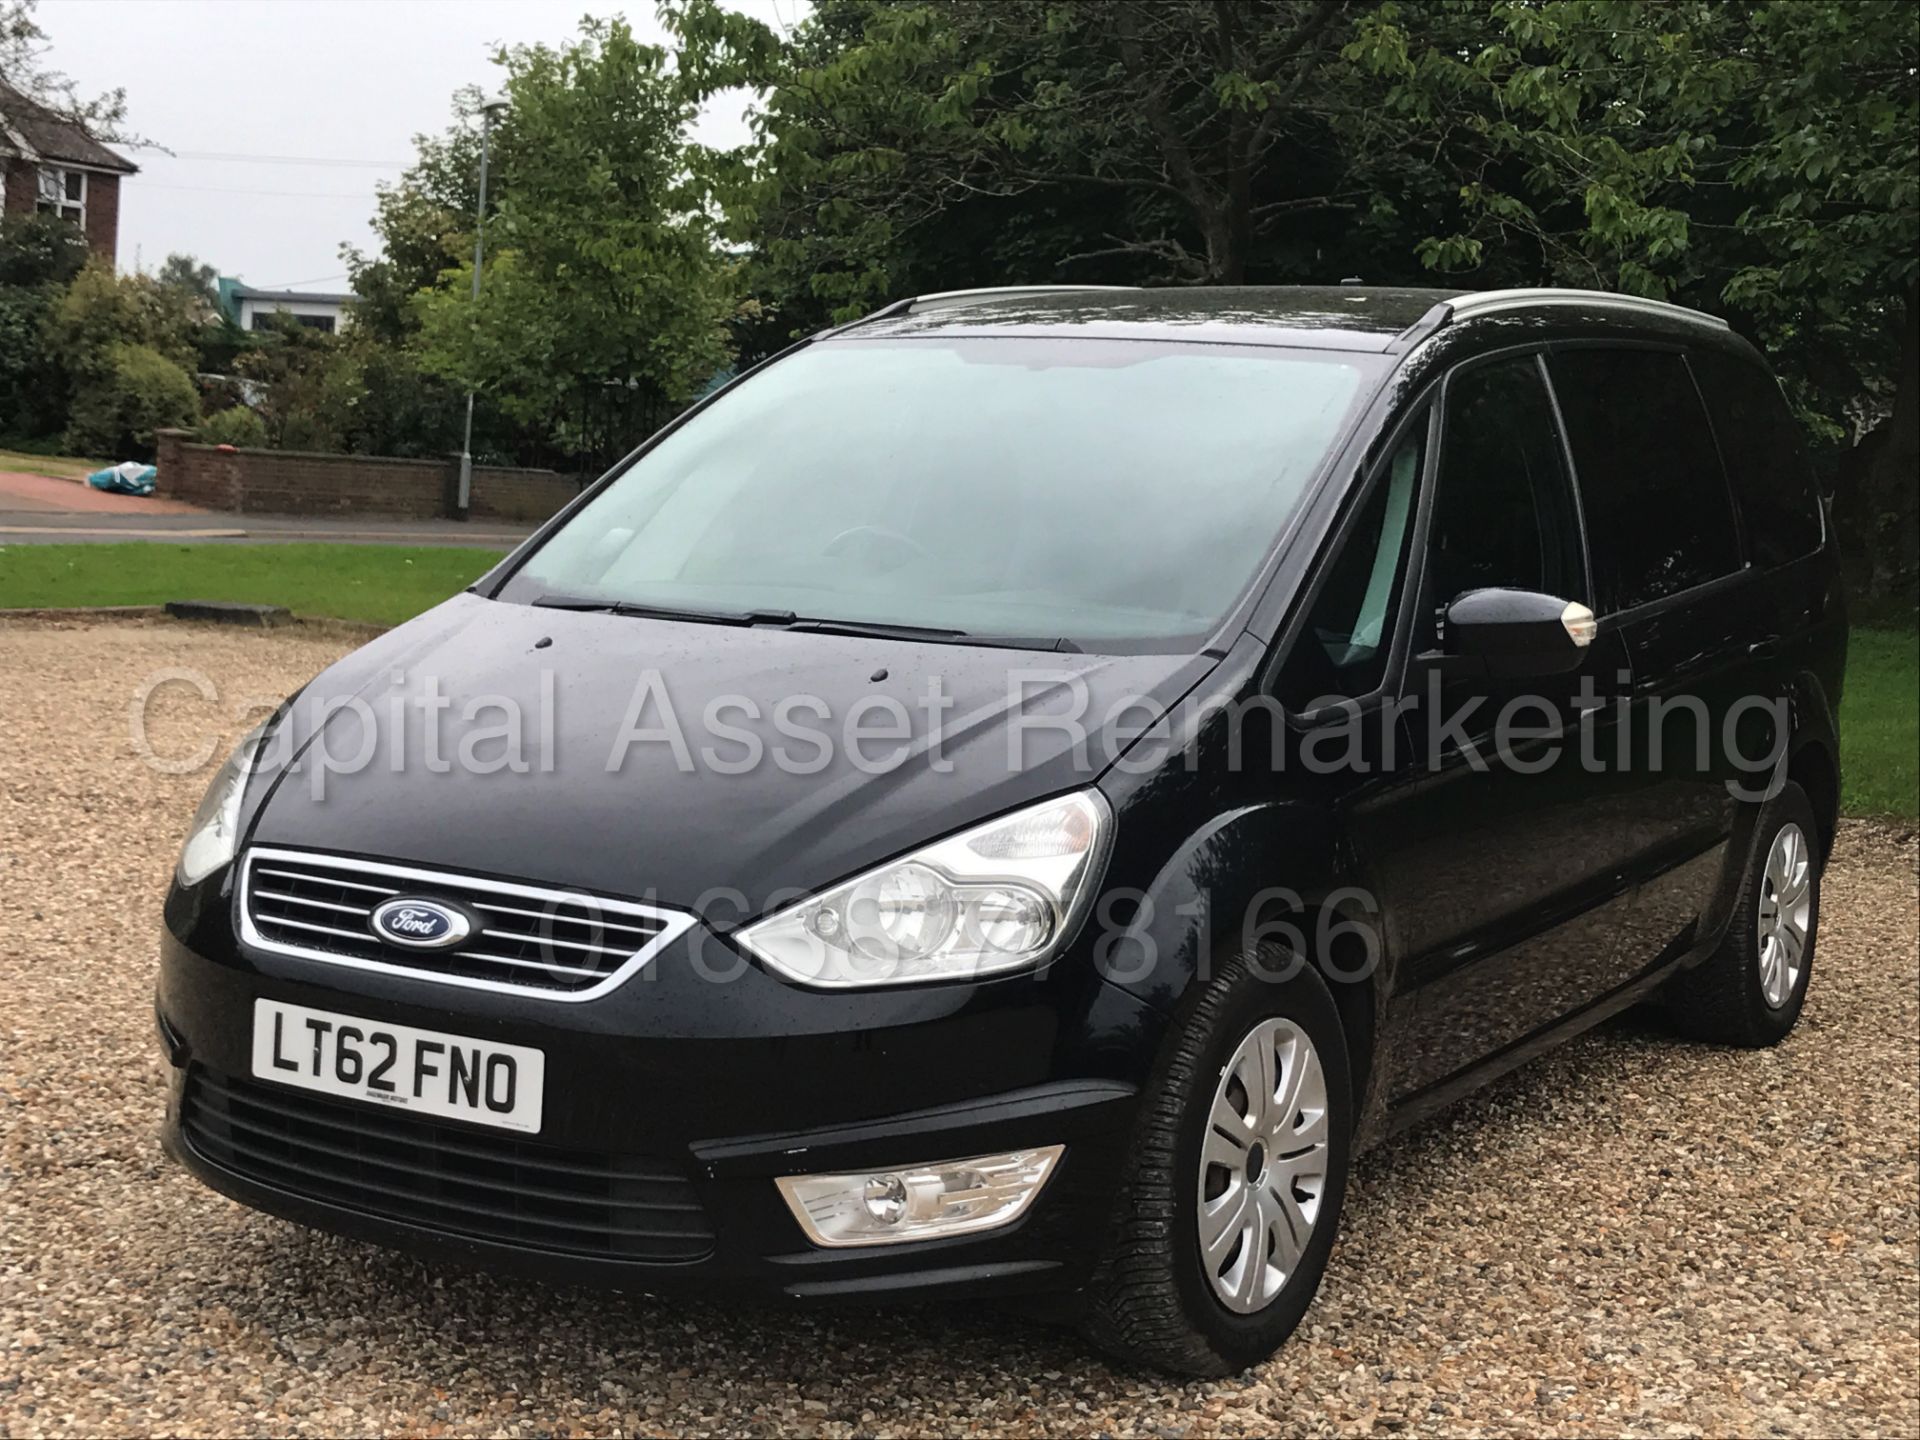 (On Sale) FORD GALAXY 'ZETEC' 7 SEATER MPV (2013 MODEL) '2.0 TDCI - 140 BHP - POWER SHIFT' - Image 5 of 27